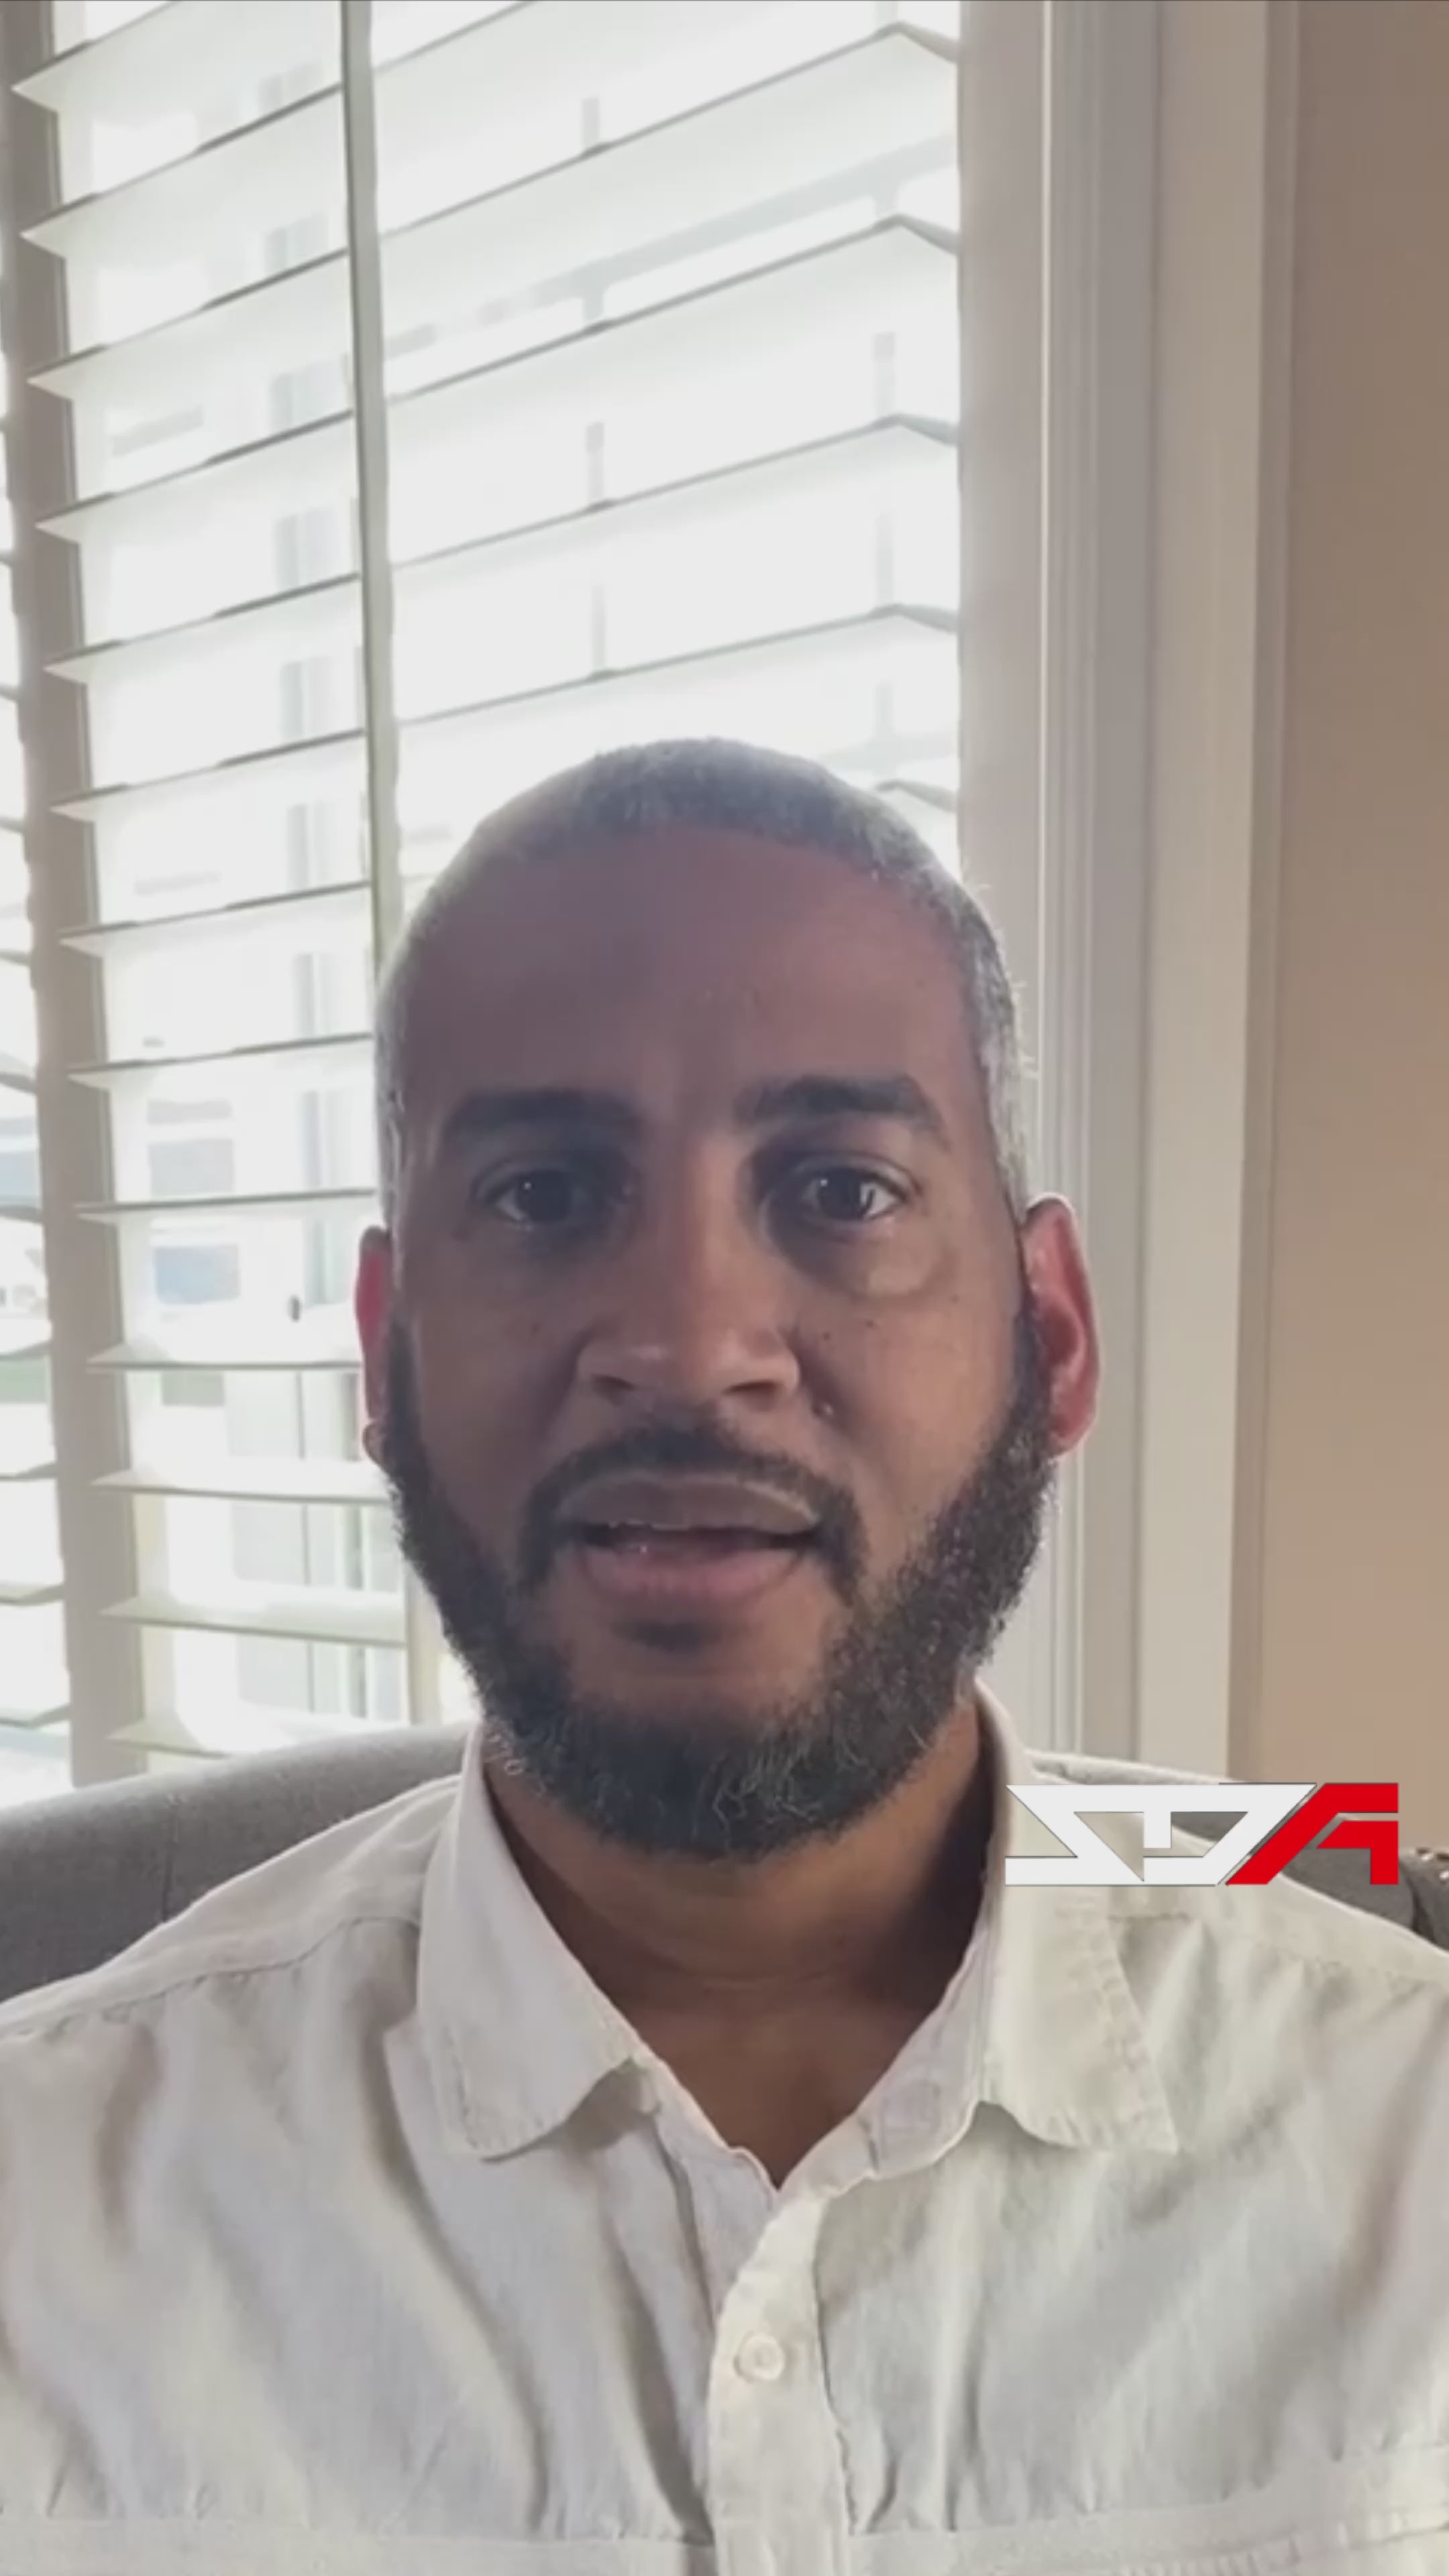 Load video: This is a full video description of what others have to say about Saire Davis Academy and the results that Coach Sai provides to your athletes so quickly.